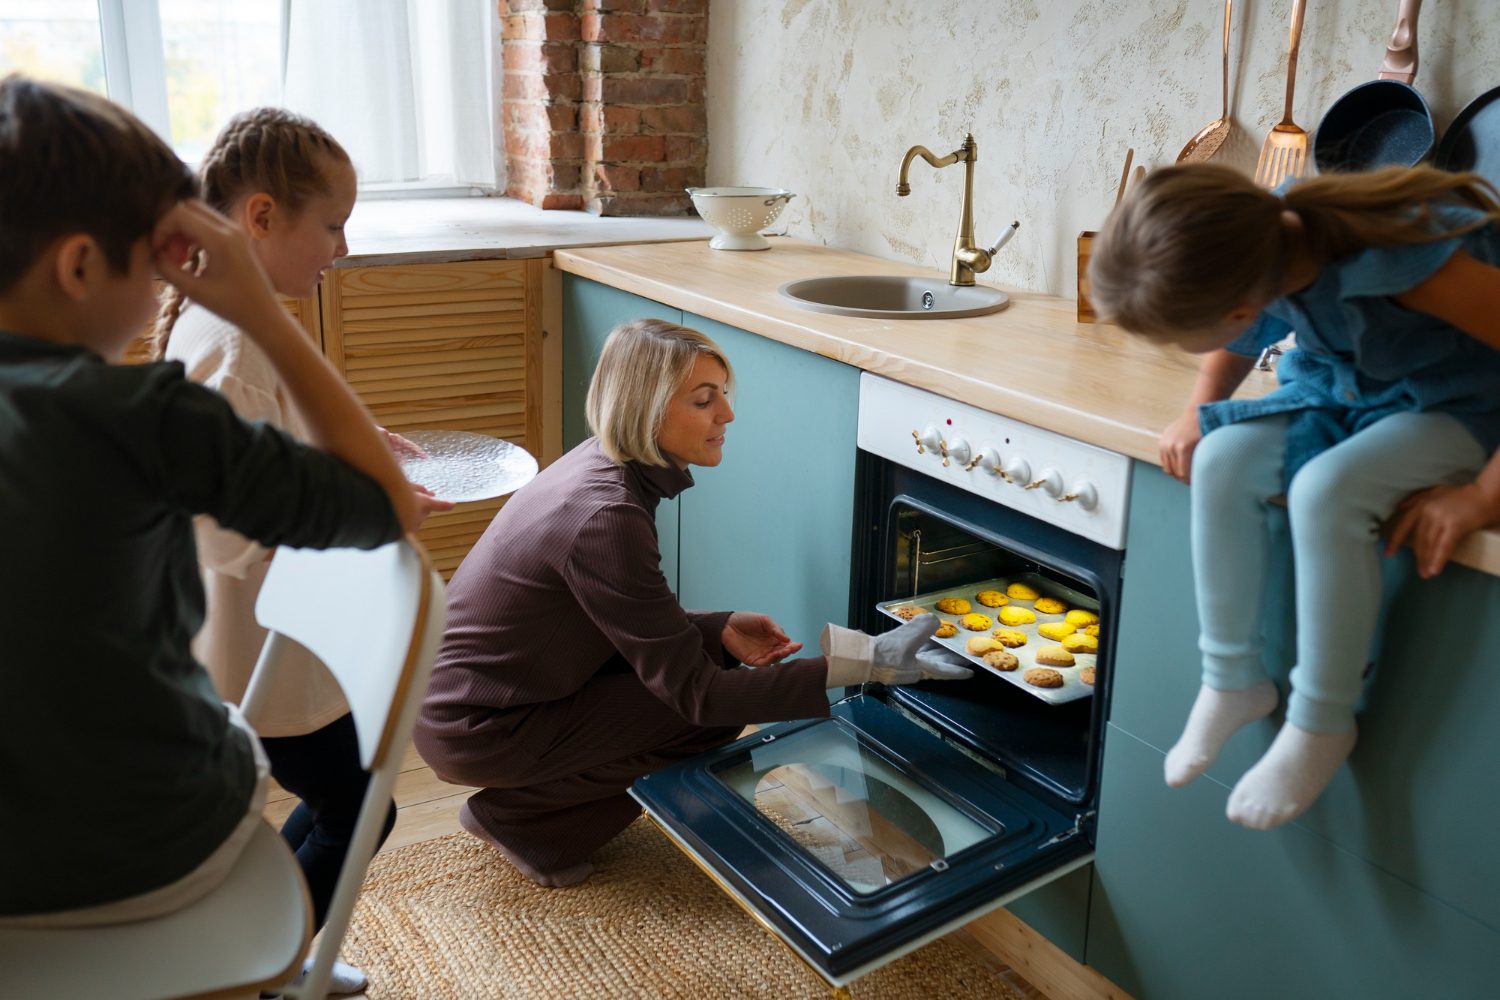 Appliance Repair for Busy Families: Time-Saving Strategies